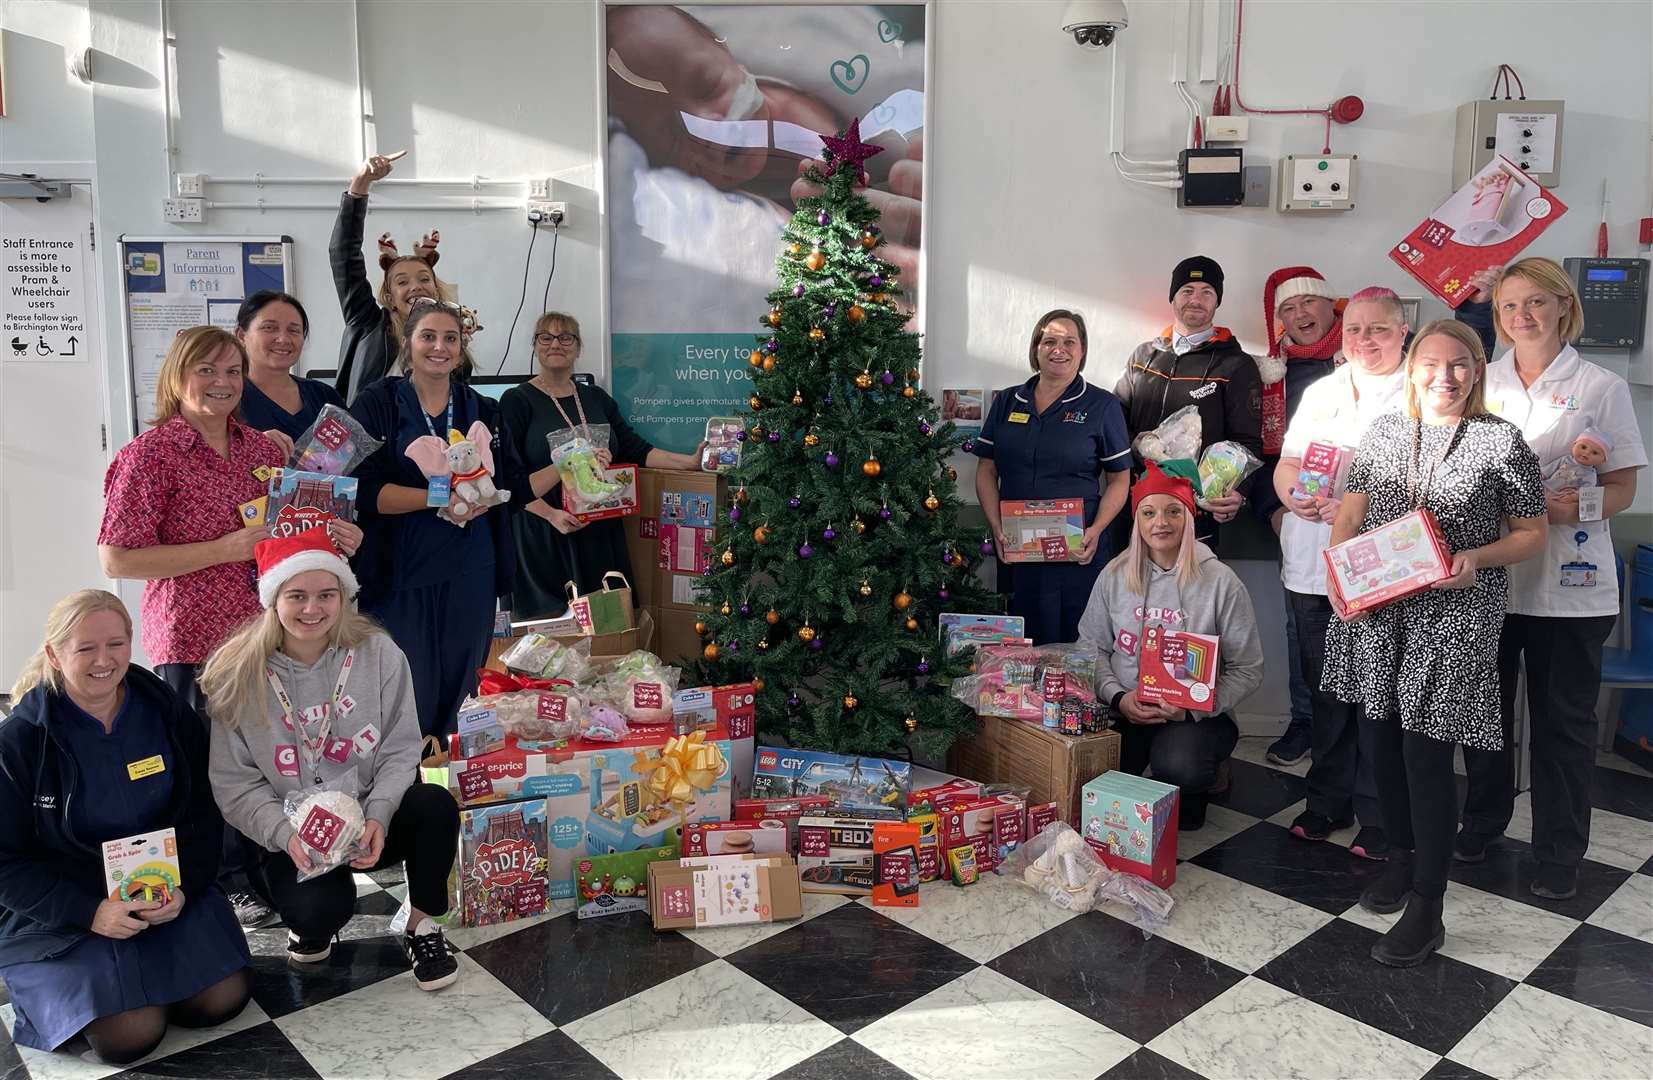 Toys were delivered by kmfm's Garry and Chelsea to staff at the QEQM hospital